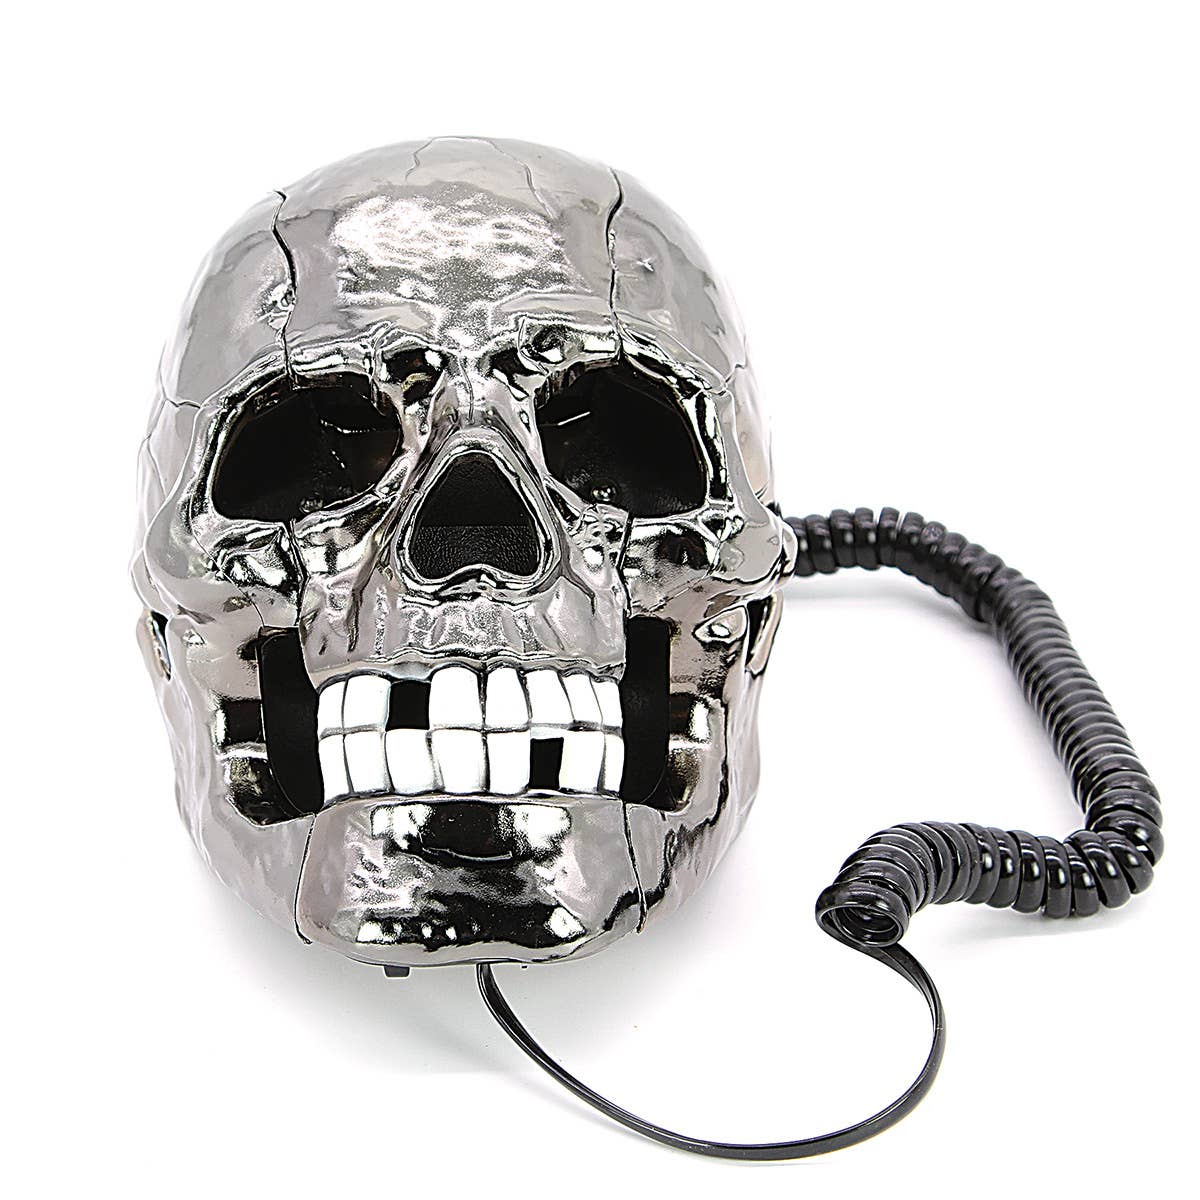 COMECO INC - 81402PH Skull Telephone with LED Lights Glowing Eyes (7831943905507)